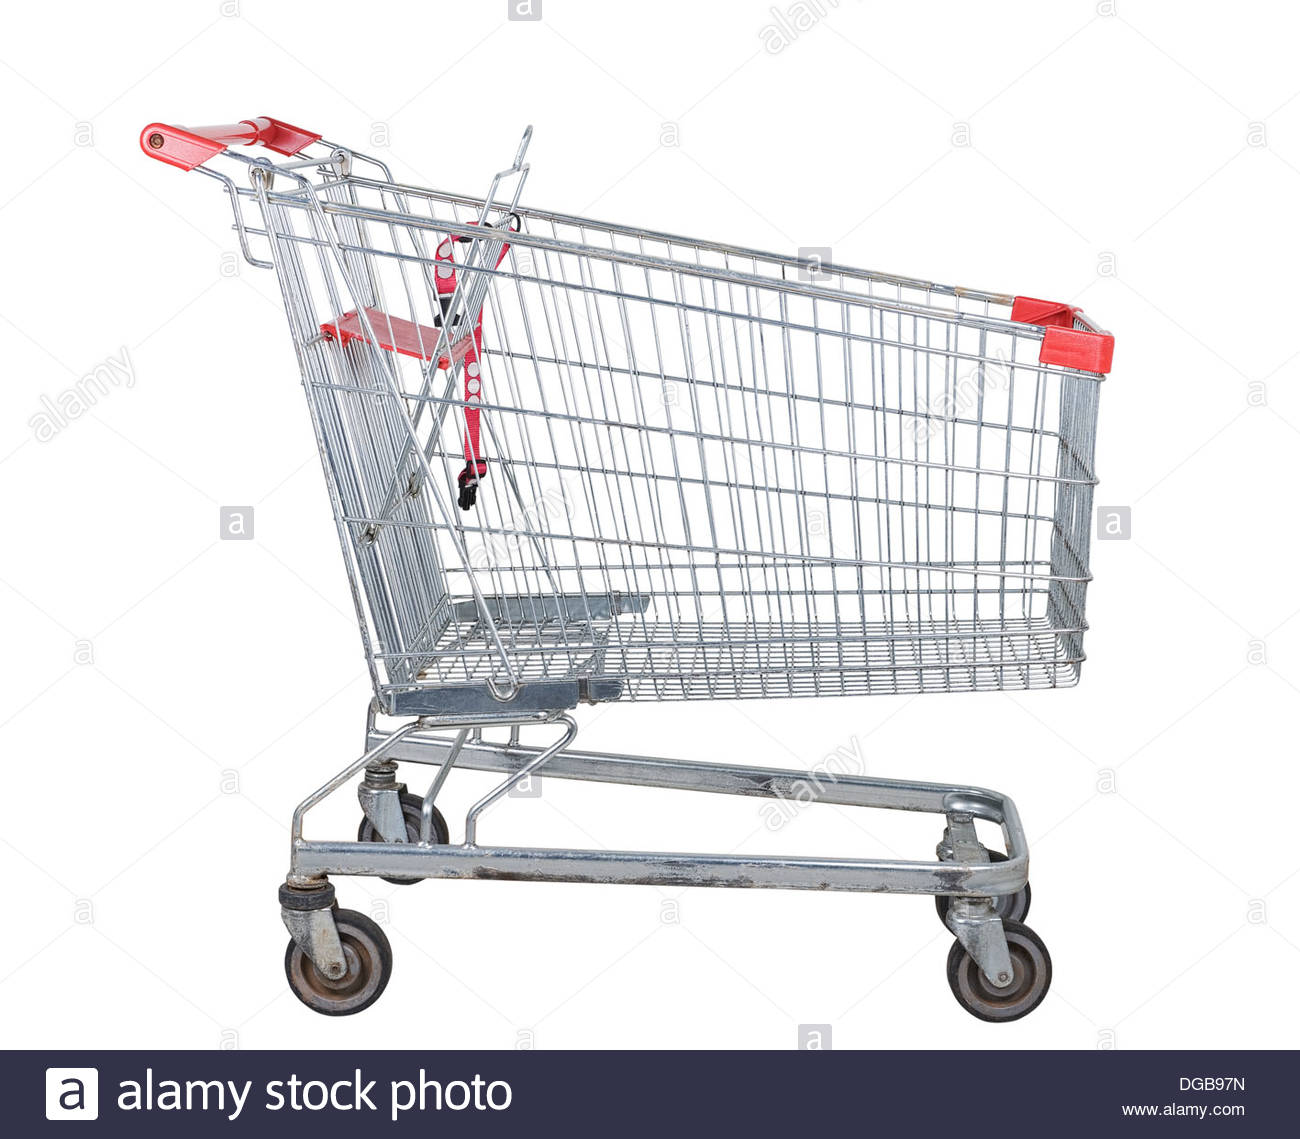 Empty Used Shopping Trolley Isolated On White Background Stock